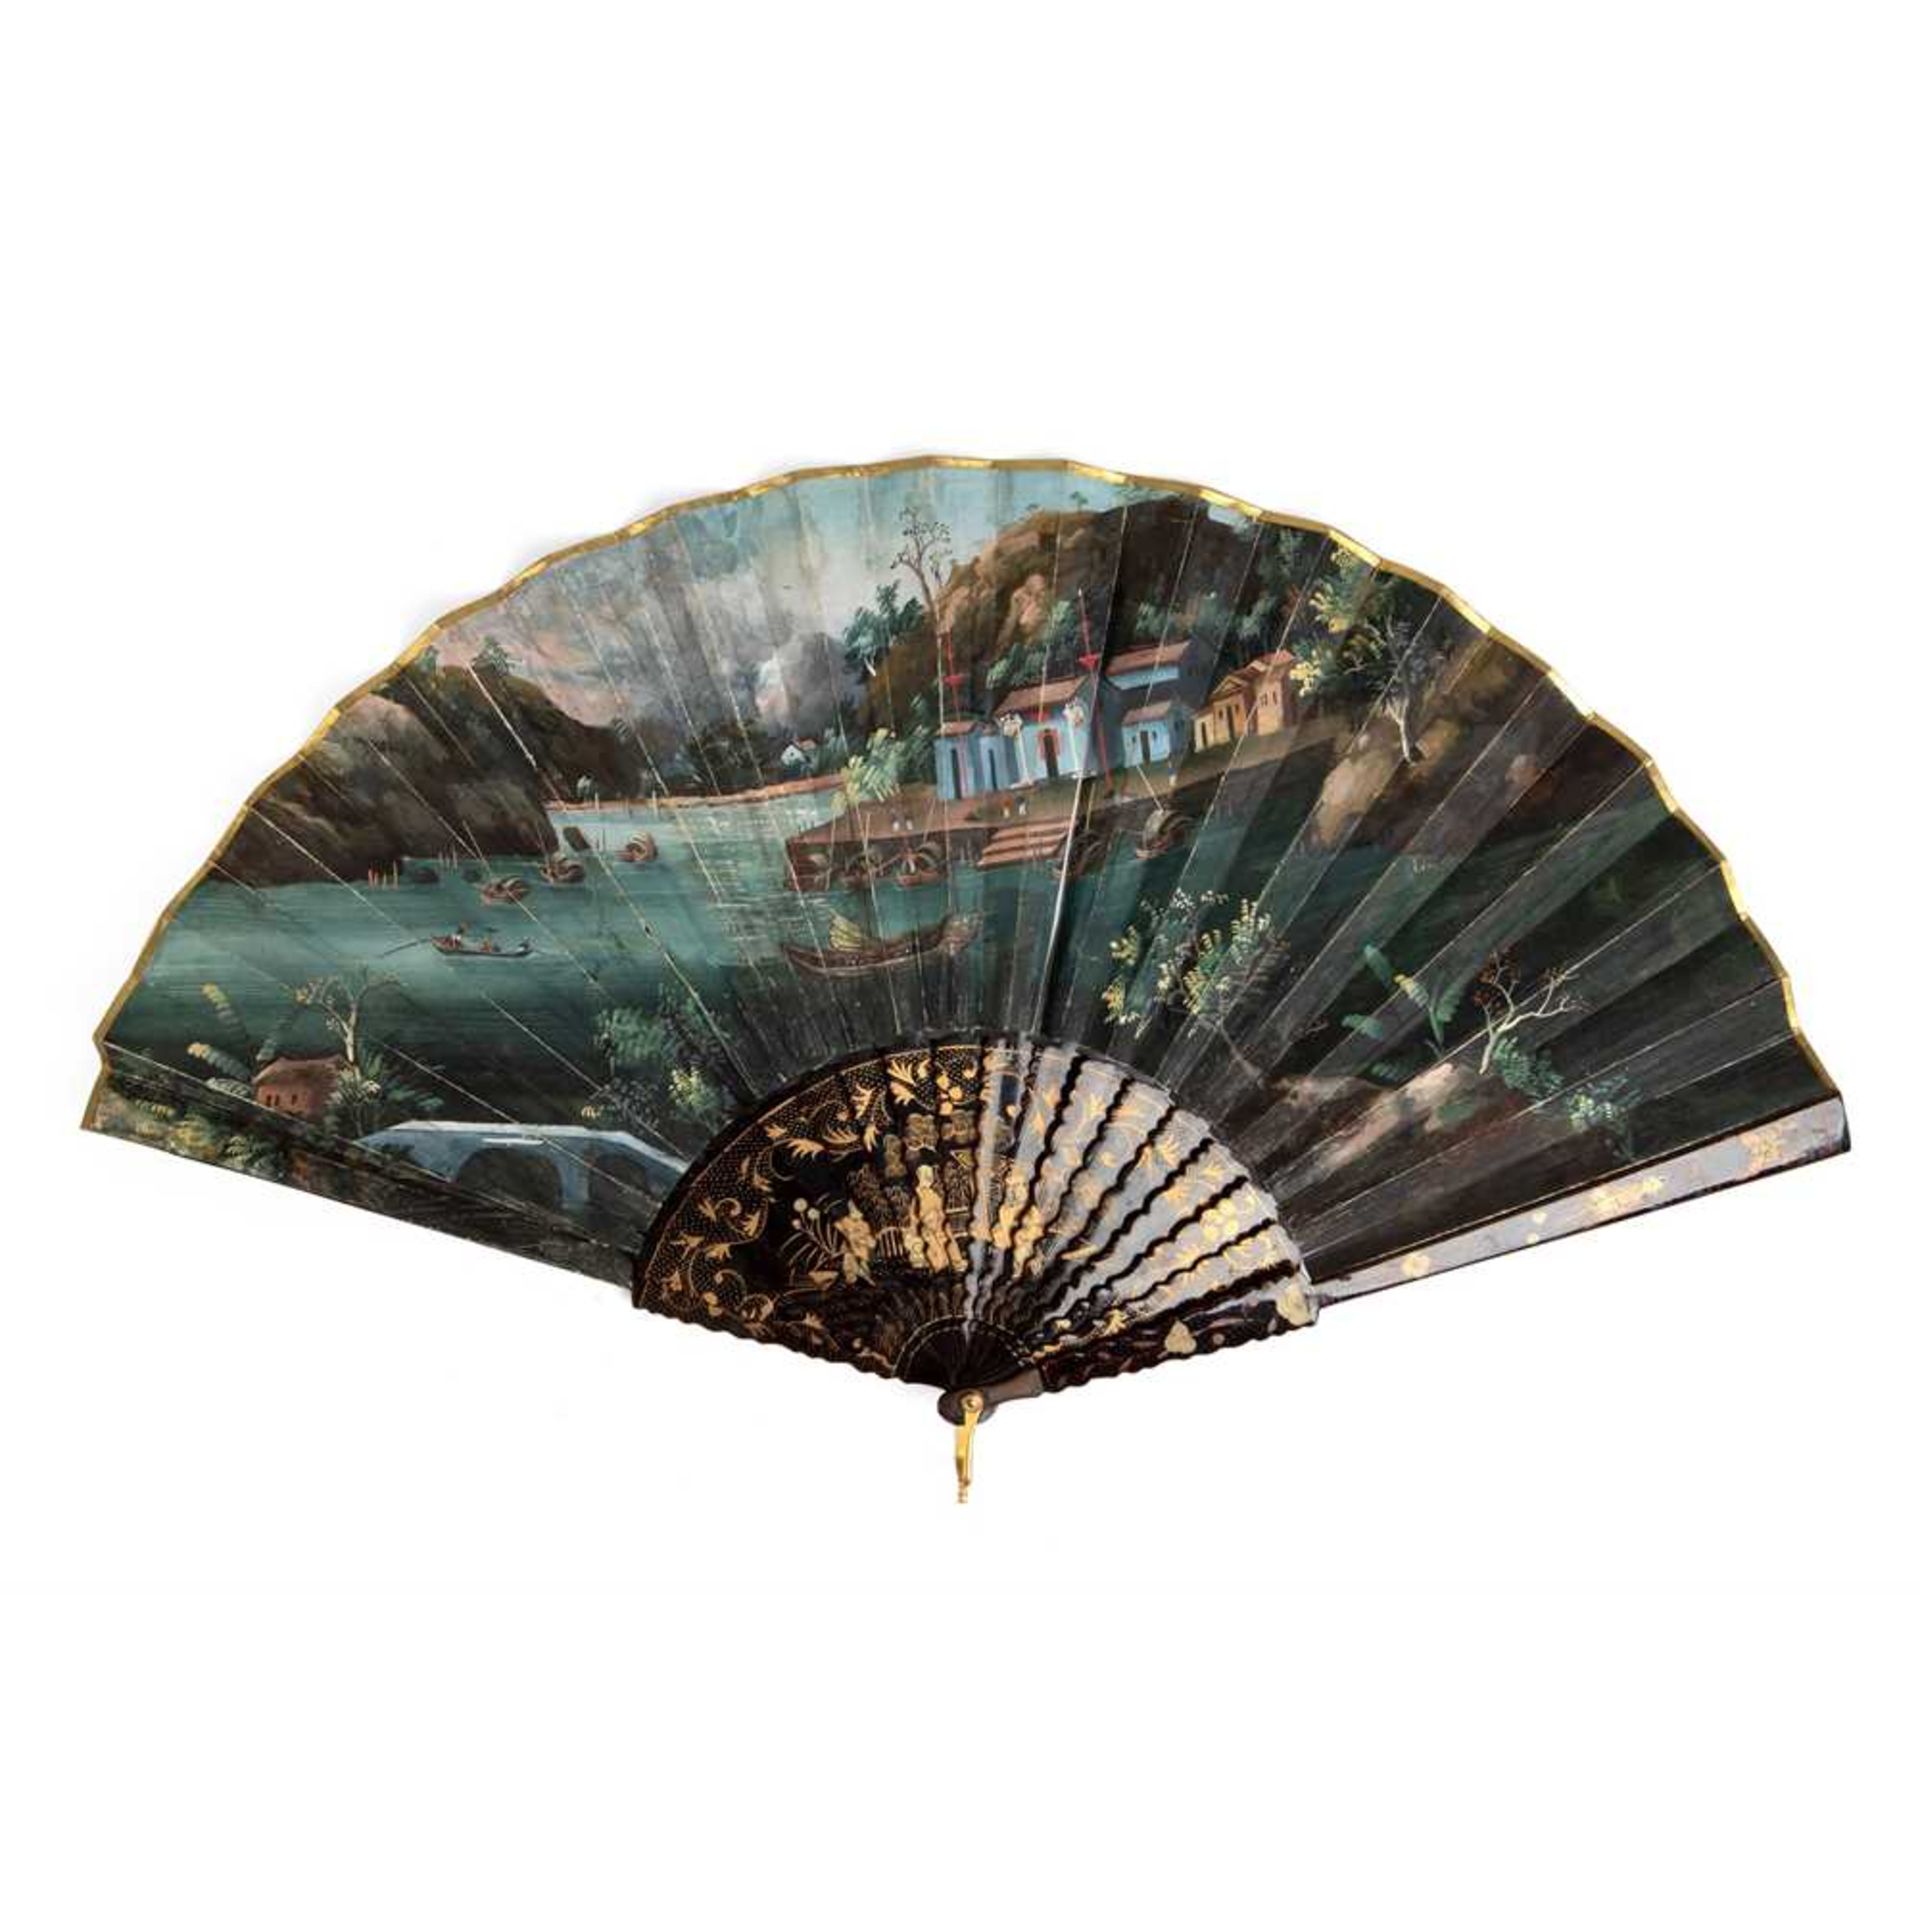 CANTON LACQUERED AND PAPER 'LANDSCAPE' FAN QING DYNASTY, MID-19TH CENTURY